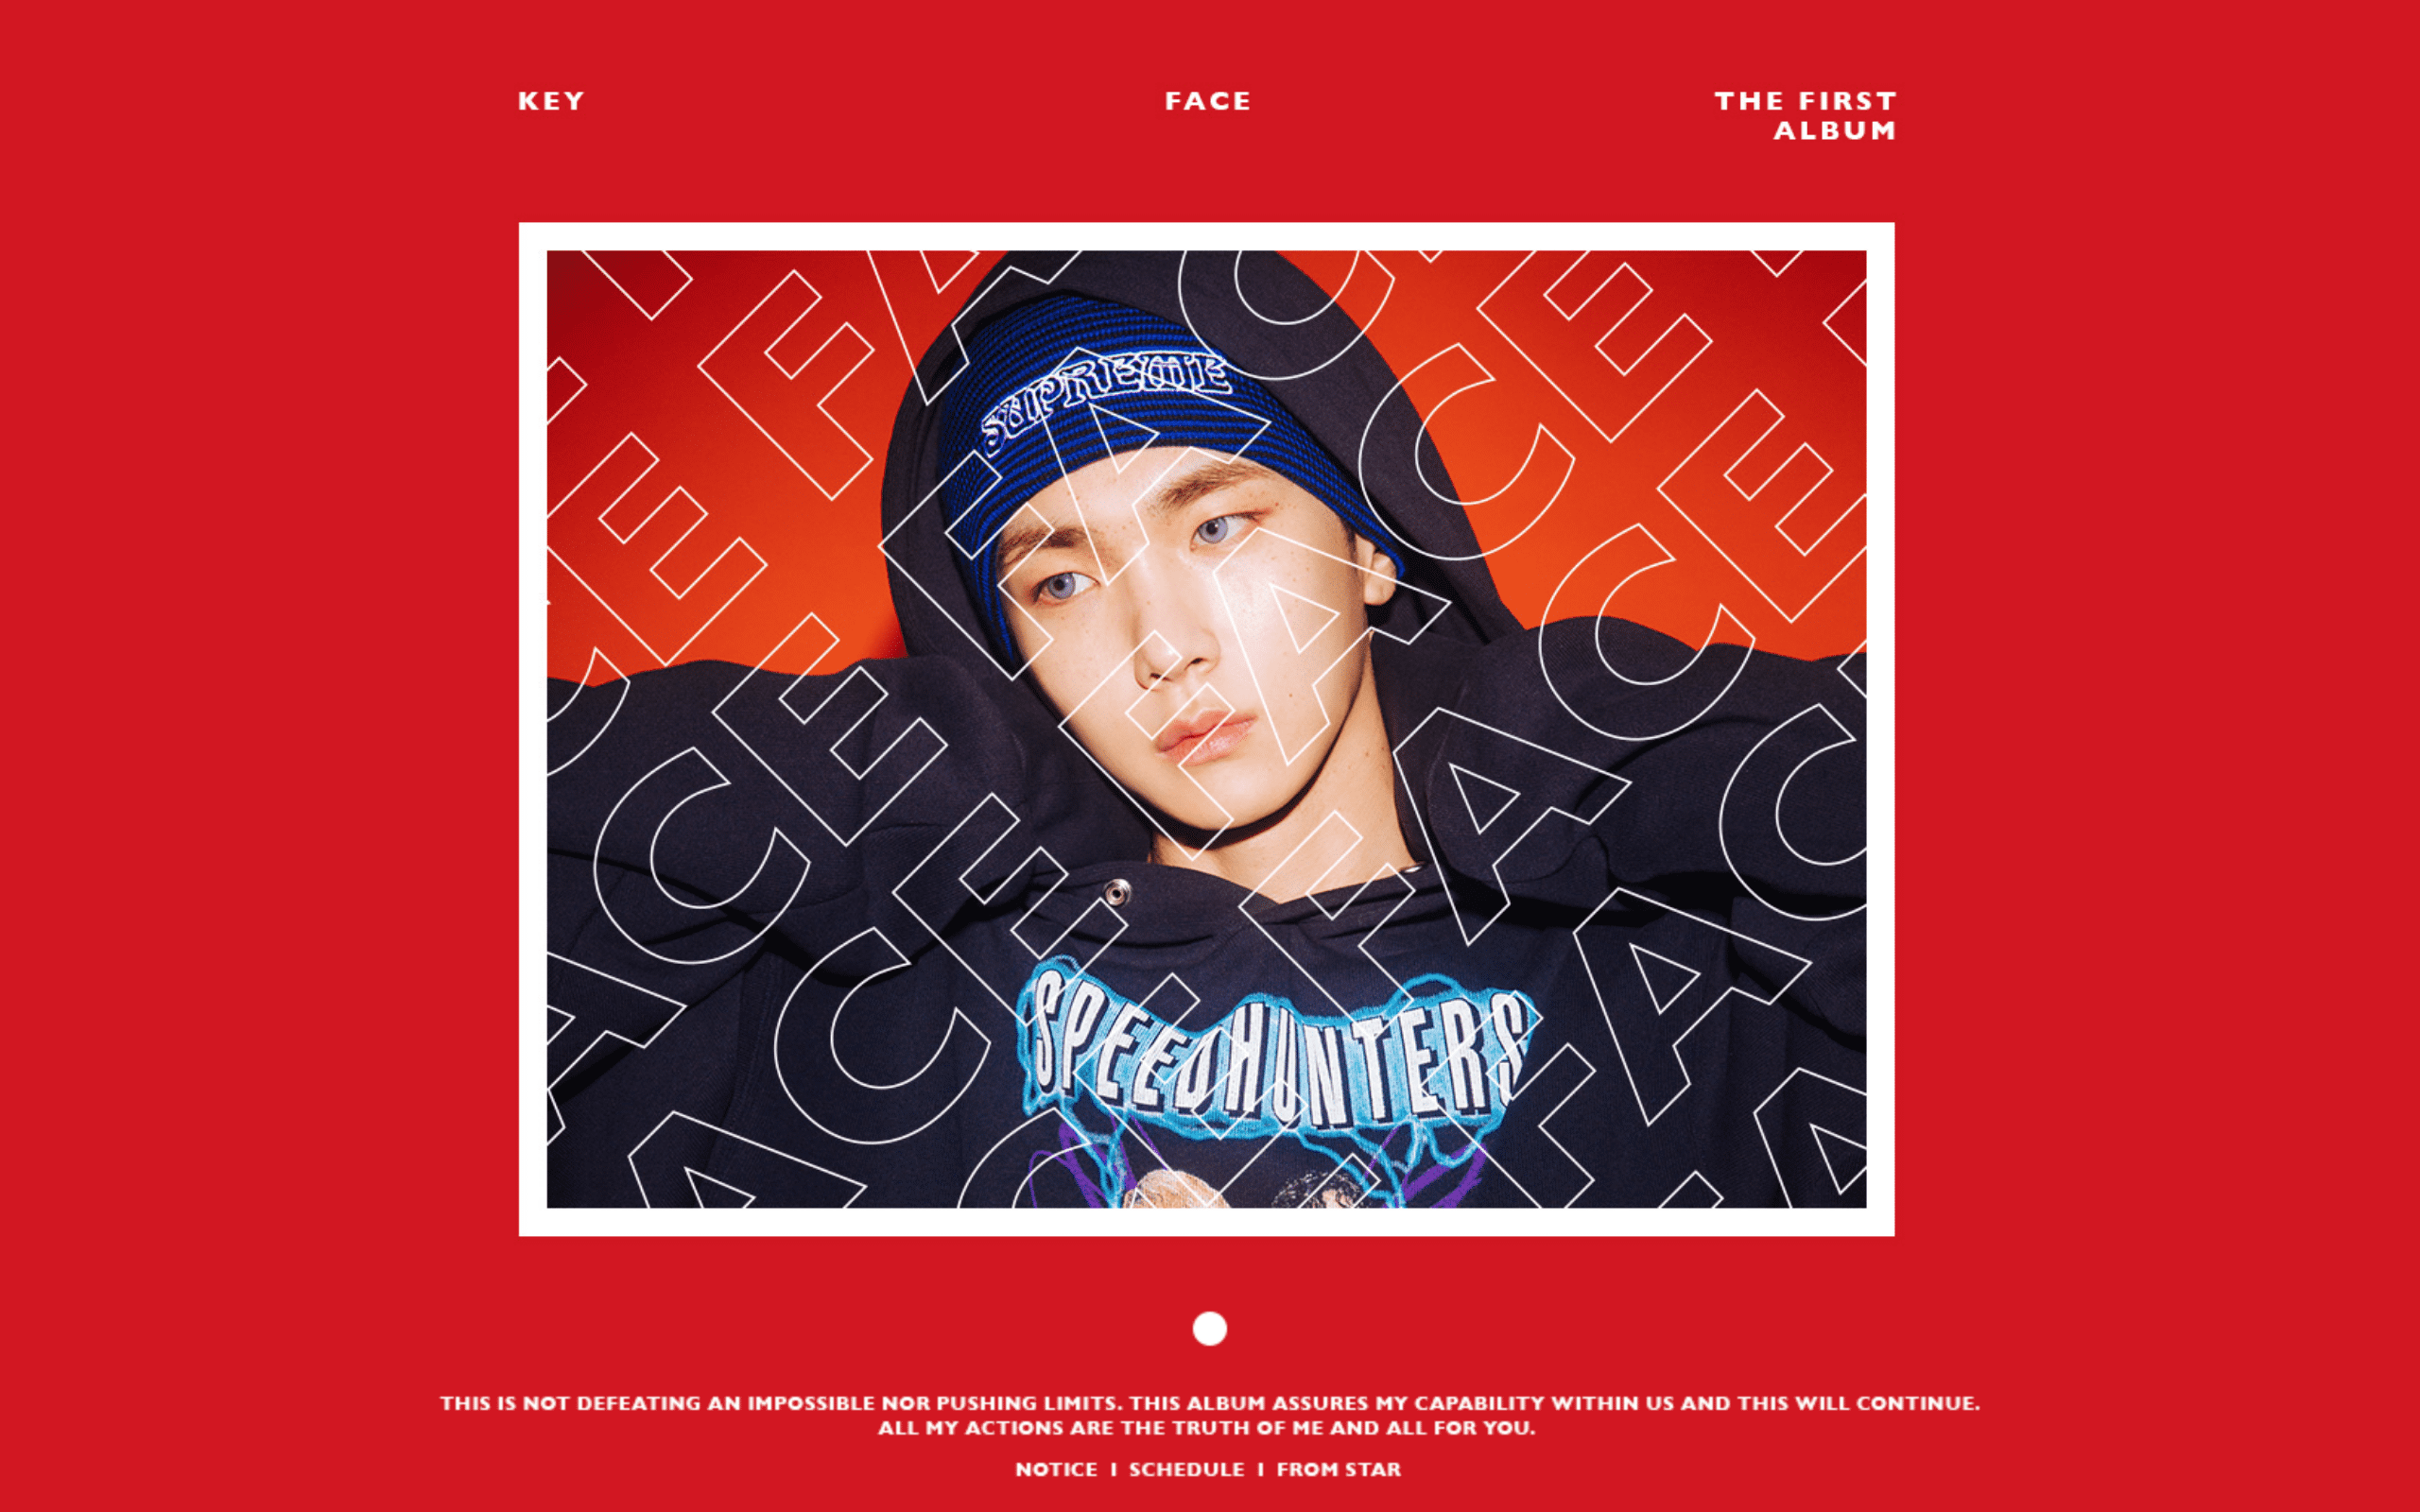 Album Review: SHINee's Key Proves To Be A Capable Soloist With #Face ...